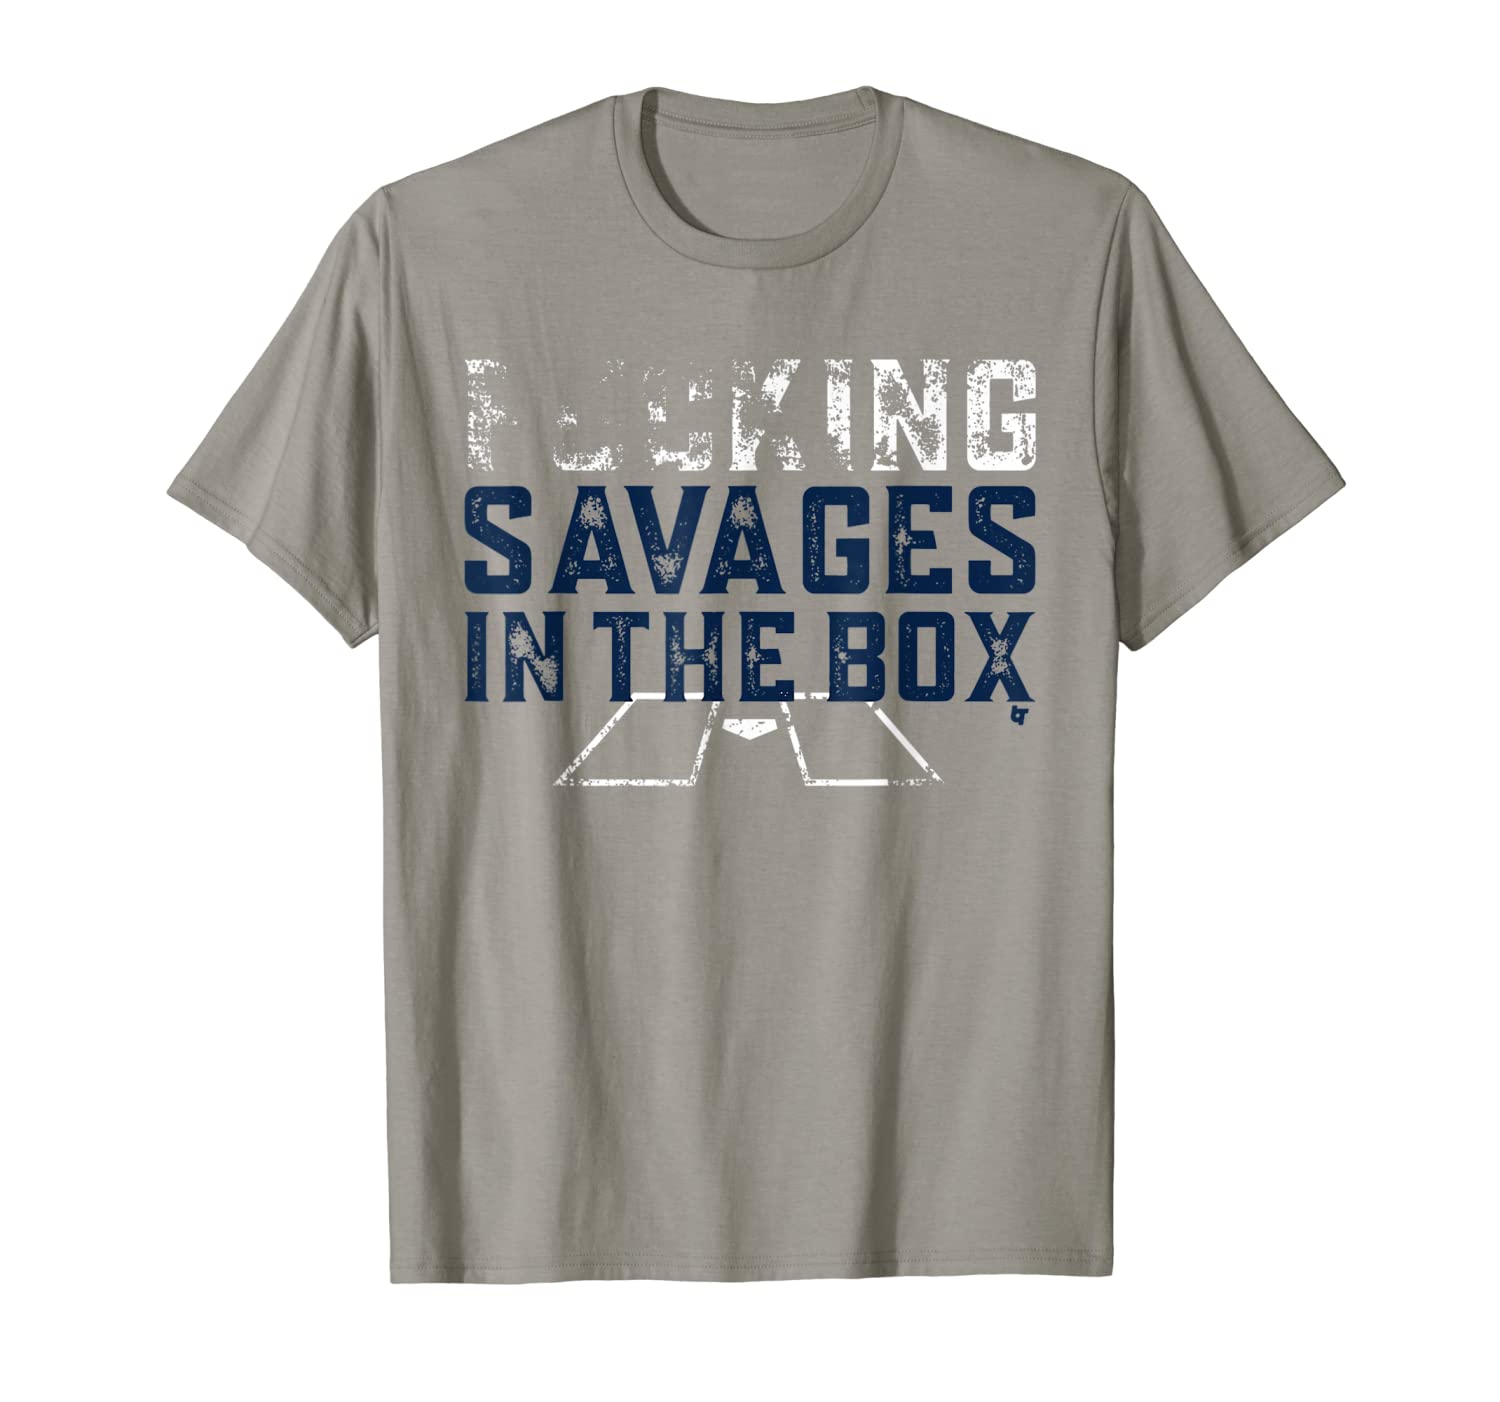 savages in the box shirt